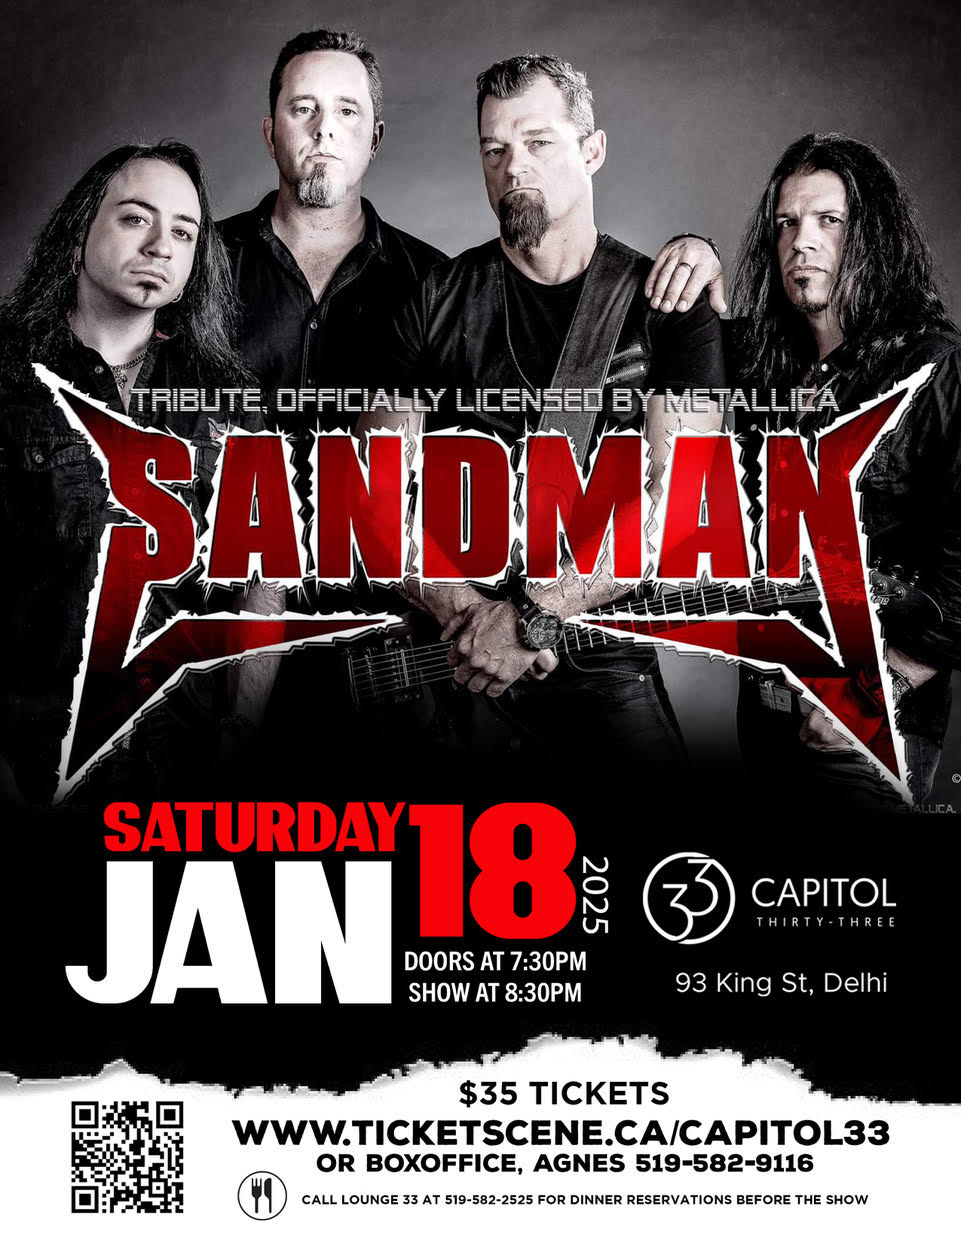 Sandman - Tribute officially licensed by Metallica 